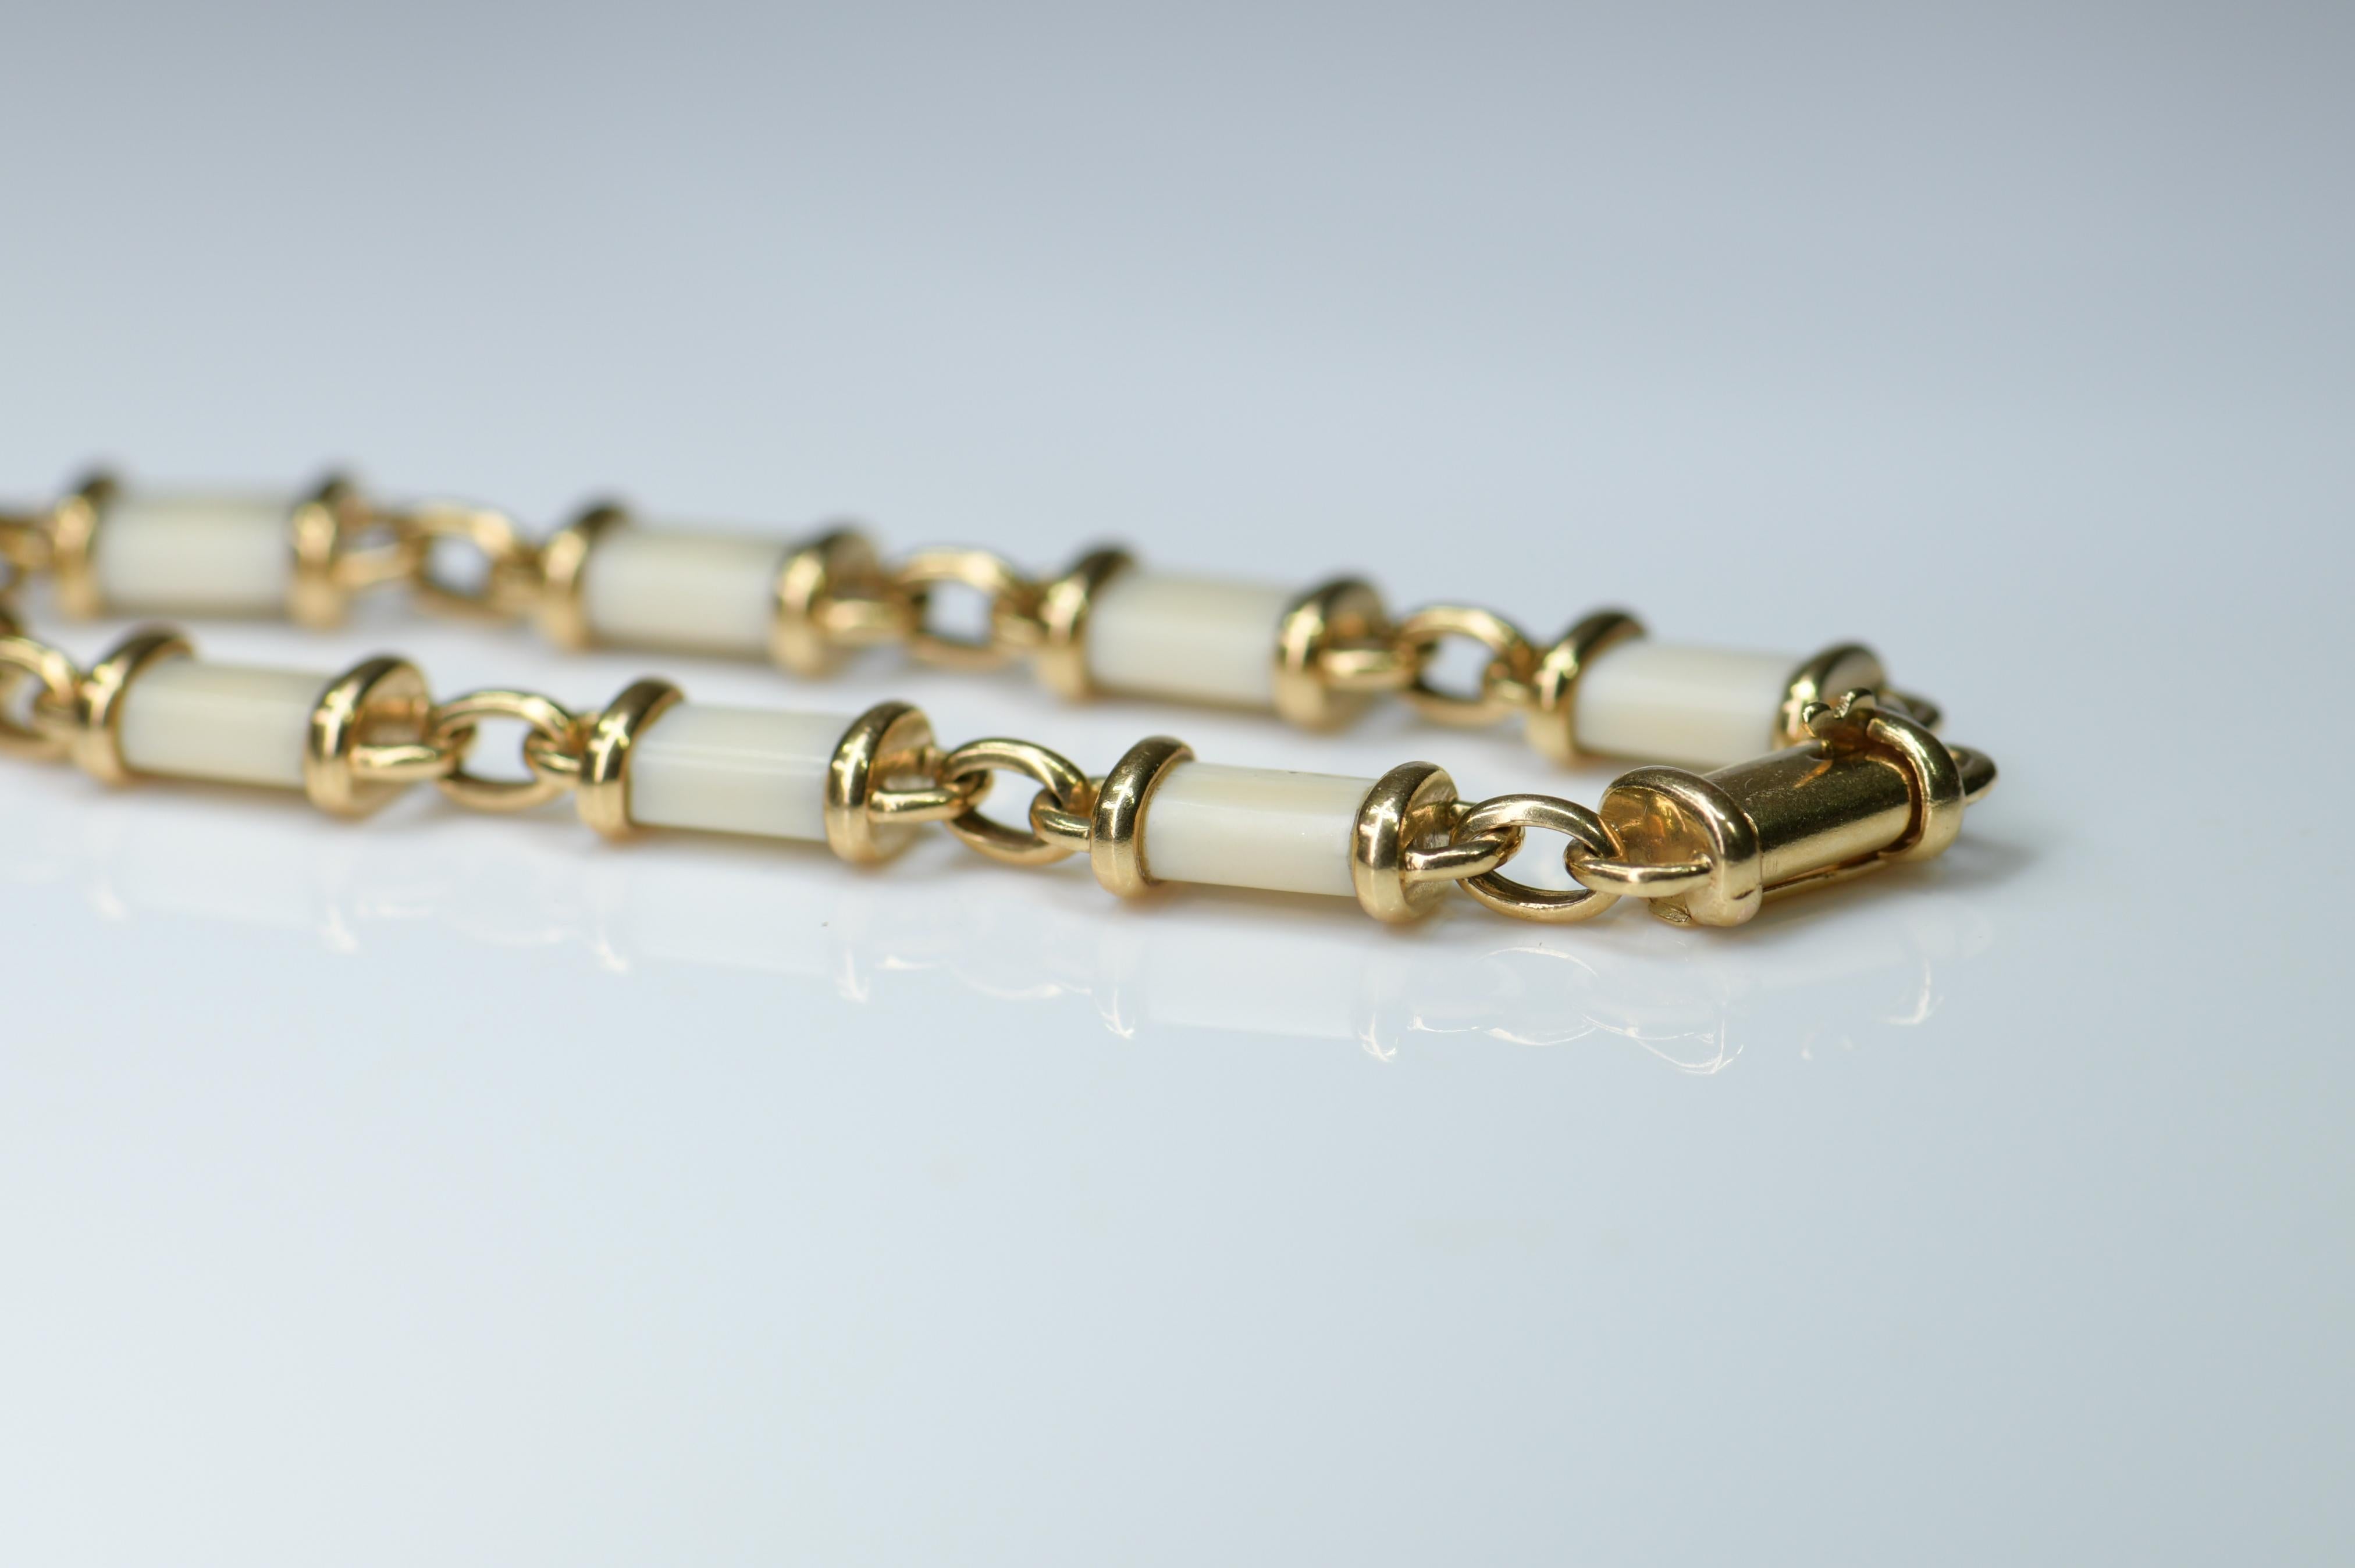 A very charming Van Cleef and Arpels horn chain-link bracelet set in 18k yellow gold. The links are articulated which allows the bracelet to sit and flow nicely on the wrist. 

This is a classic design of Van Cleef & Arpels 70s bracelet, a highly